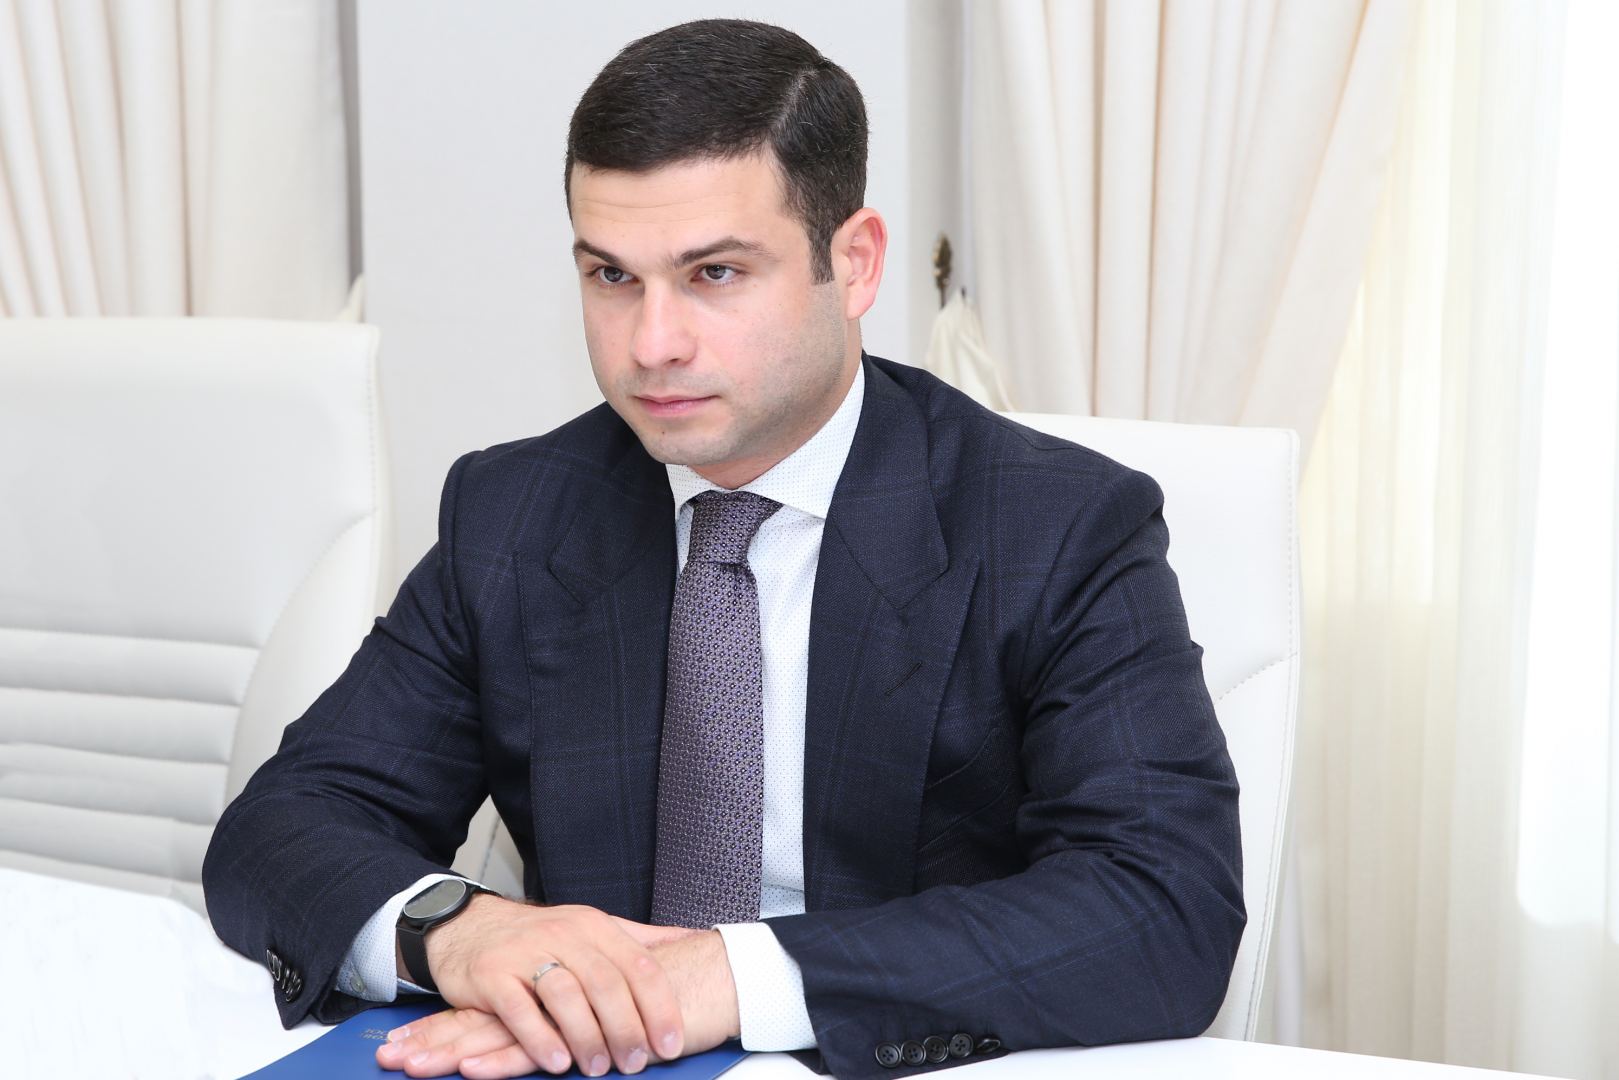 Azerbaijan provides opportunities to make utmost of Karabakh's tourism potential - official